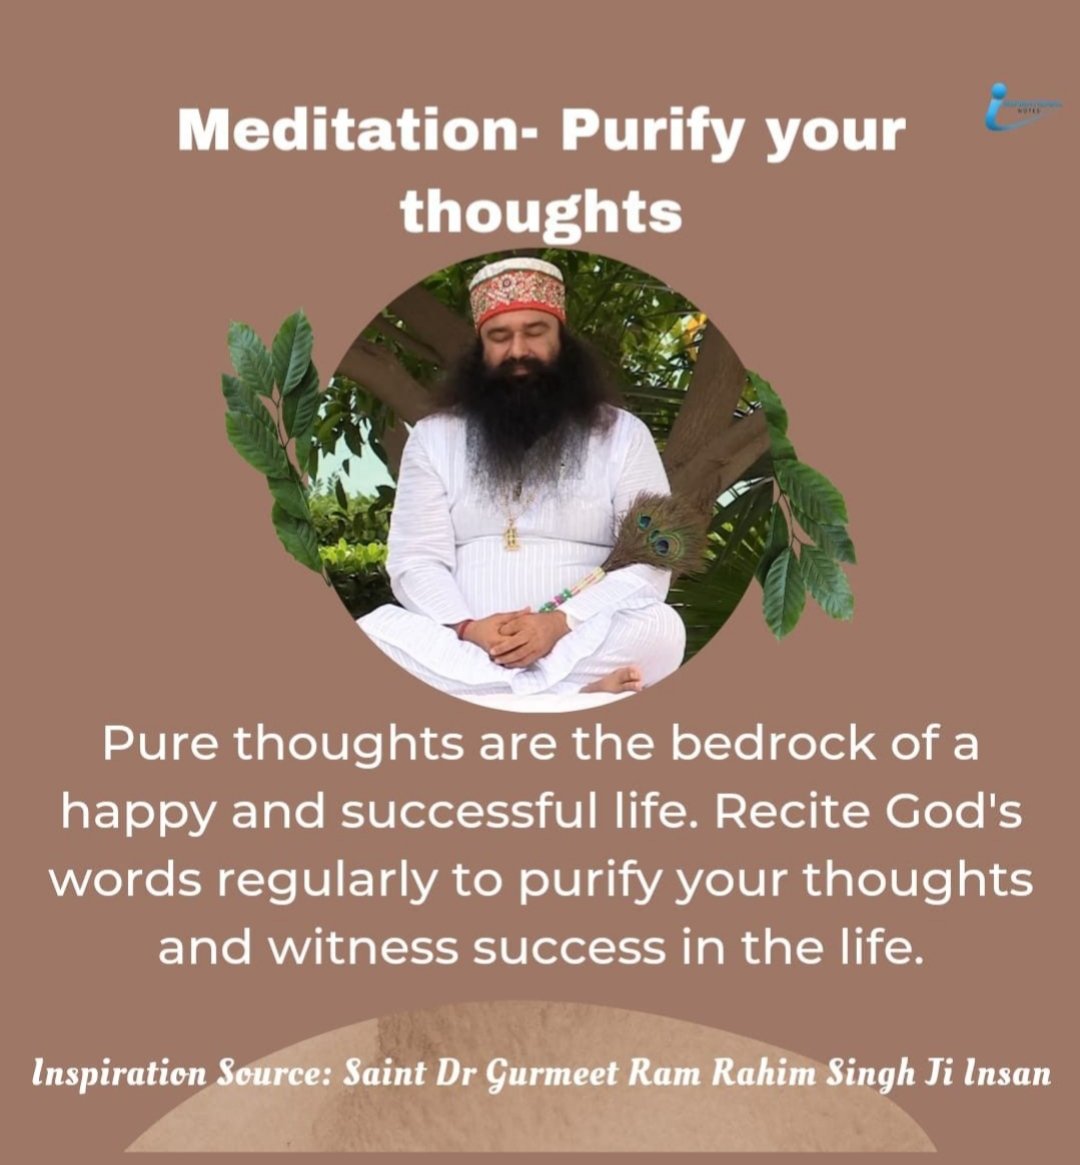 Both negative and positive thoughts keep running in our mindbut our brain quick to pick up on negativity Saint Dr.Gurmeet Ram Rahim Singh ji Insan explain that  bypracticing meditation regularly wecan overcome negativethoughts by increasing our self confidence 
#PowerOfPositivity